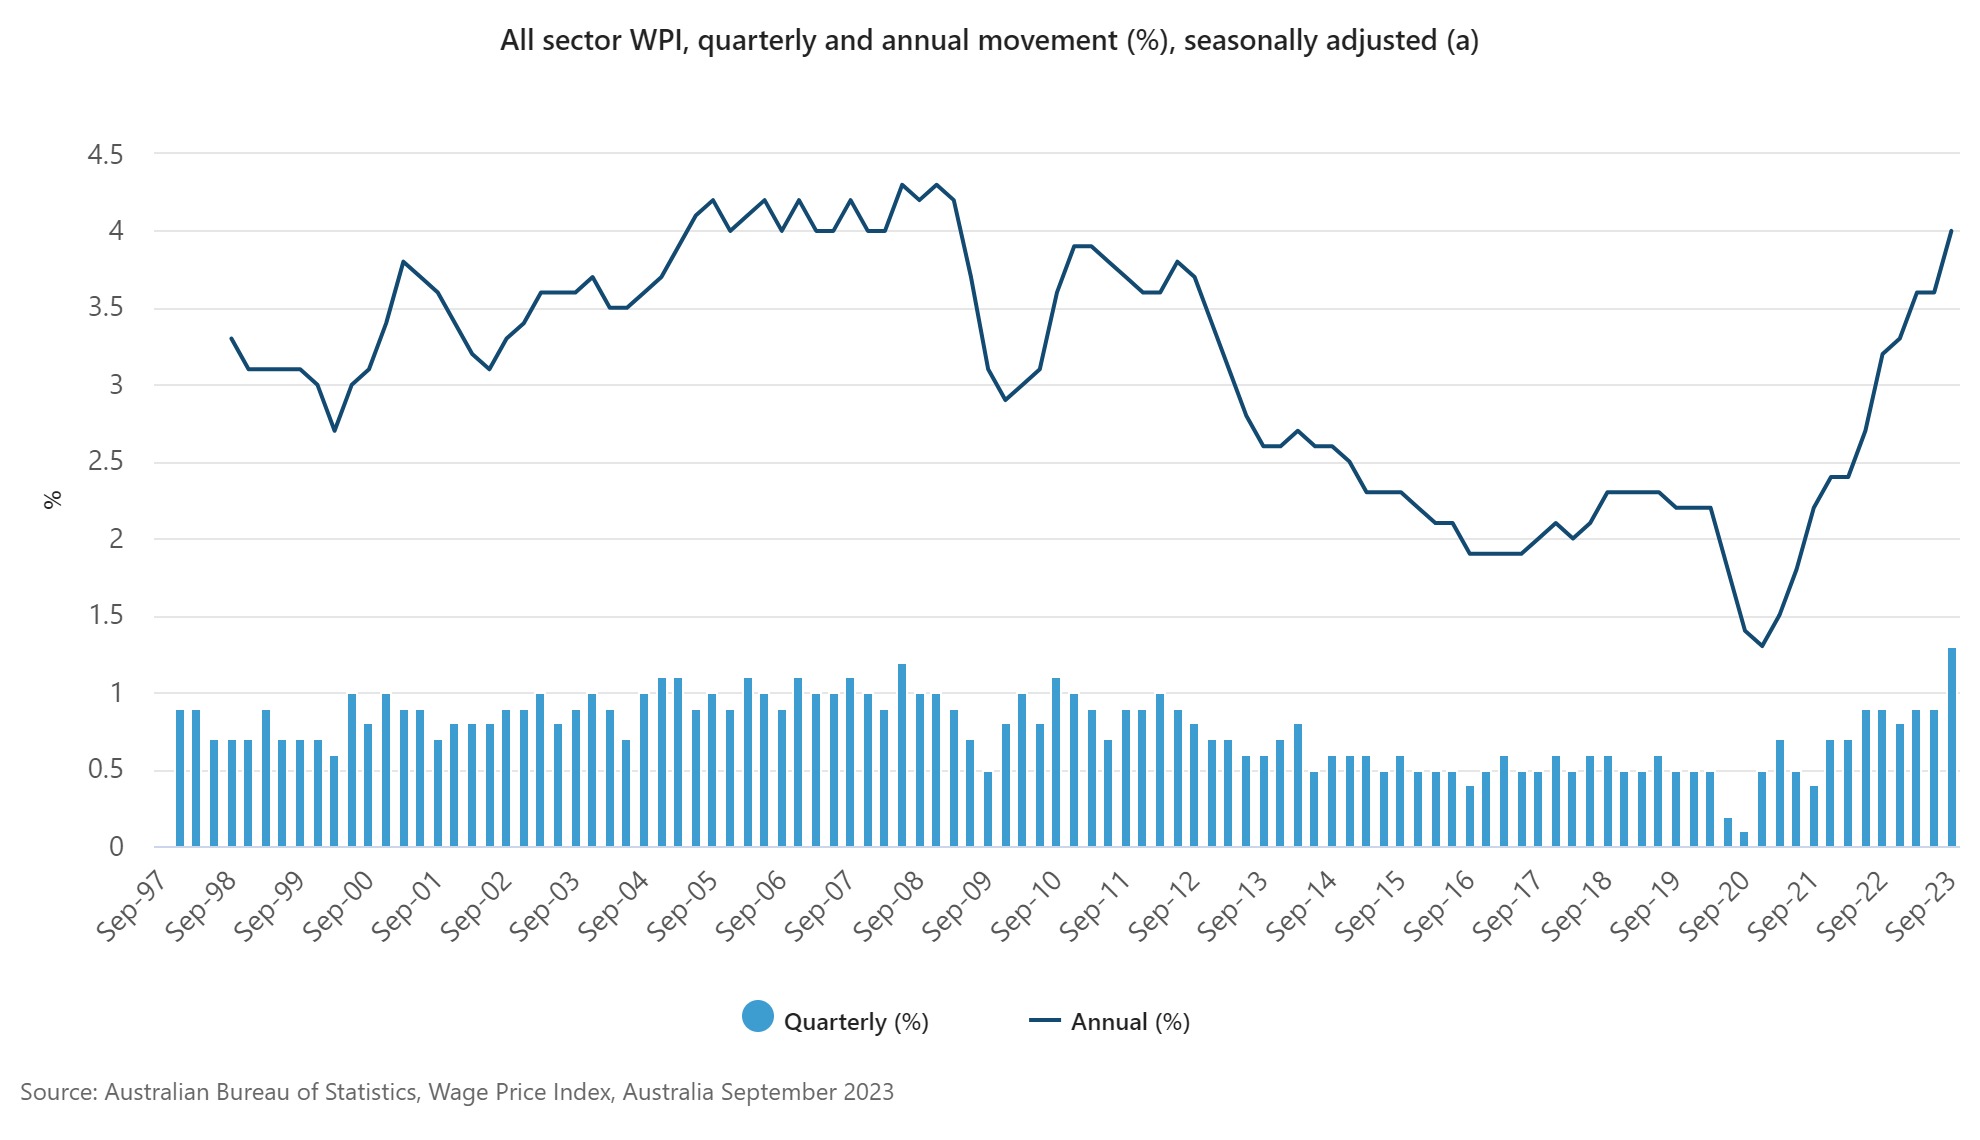 Australia's Wage Price Index (WPI) for September 2023 displayed on a graph.